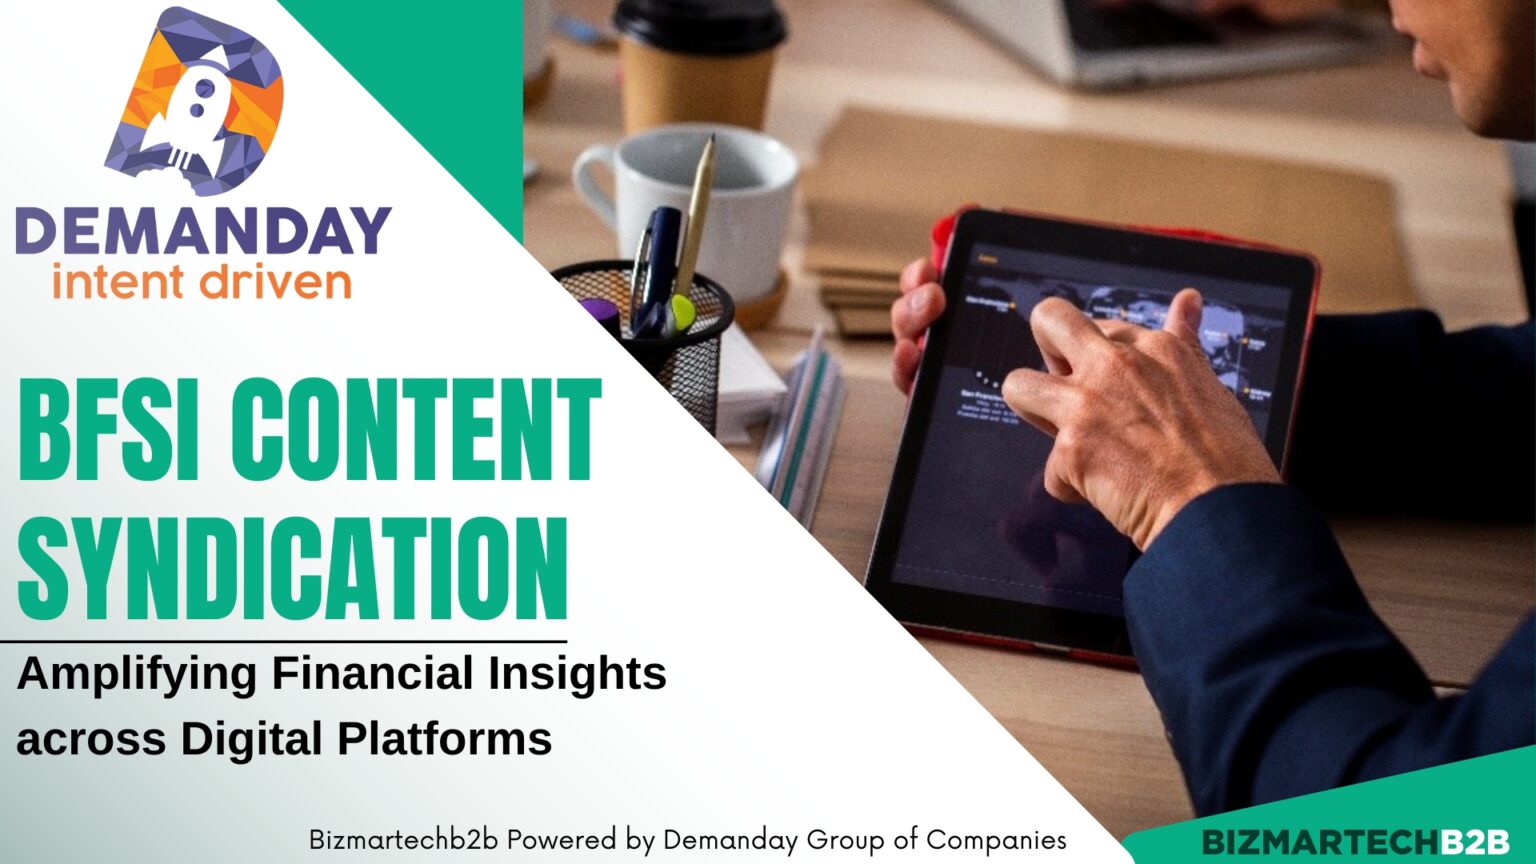 BFSI Content Syndication: Amplifying Financial Insights across Digital Platforms